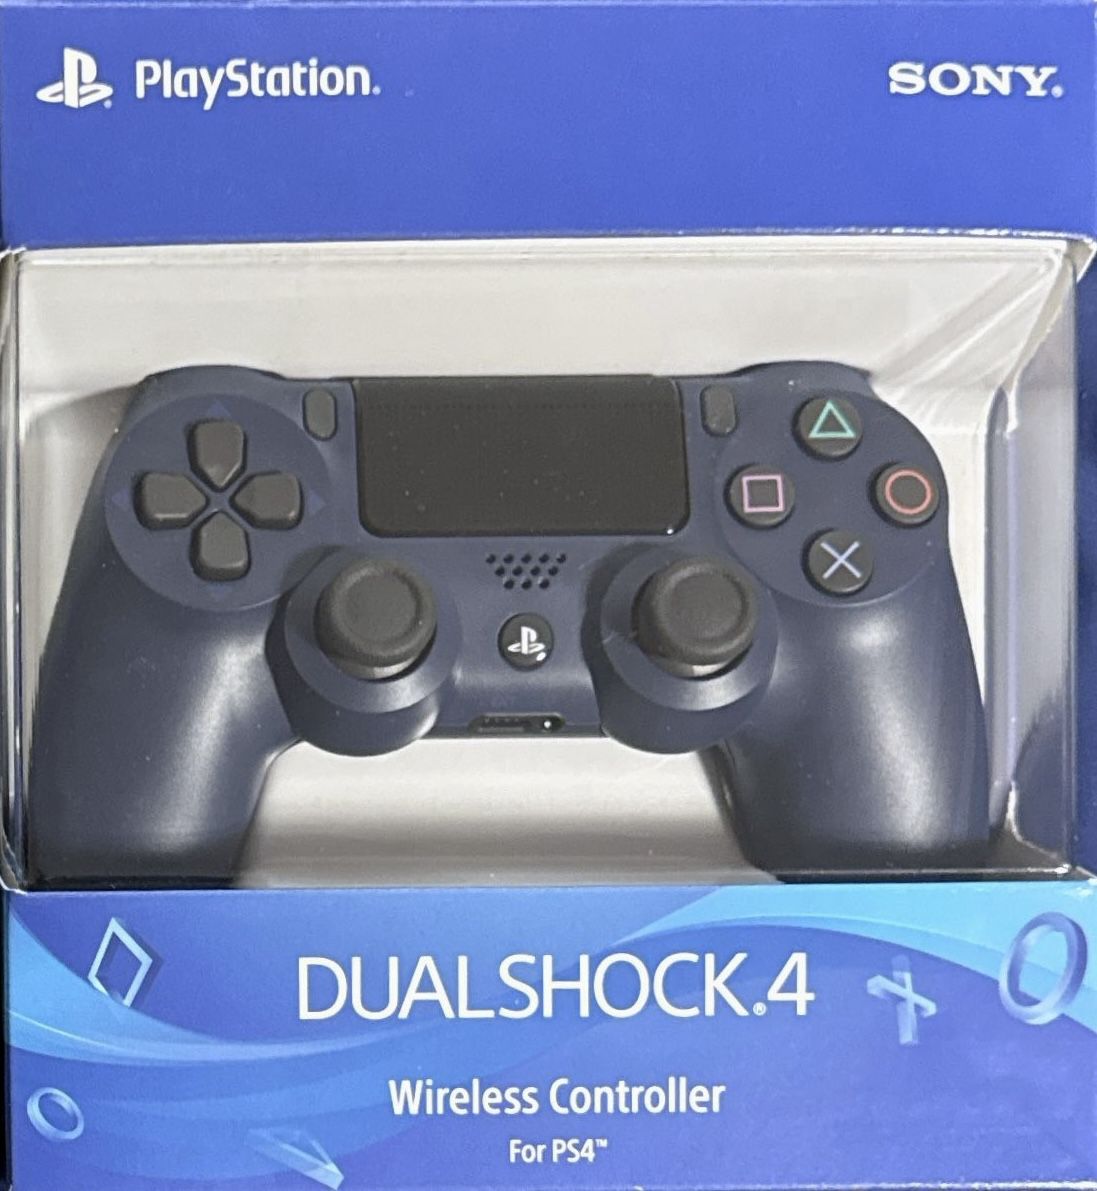 New PS4 Wireless DualShock 4 Controller Sealed Midnight Blue PlayStation